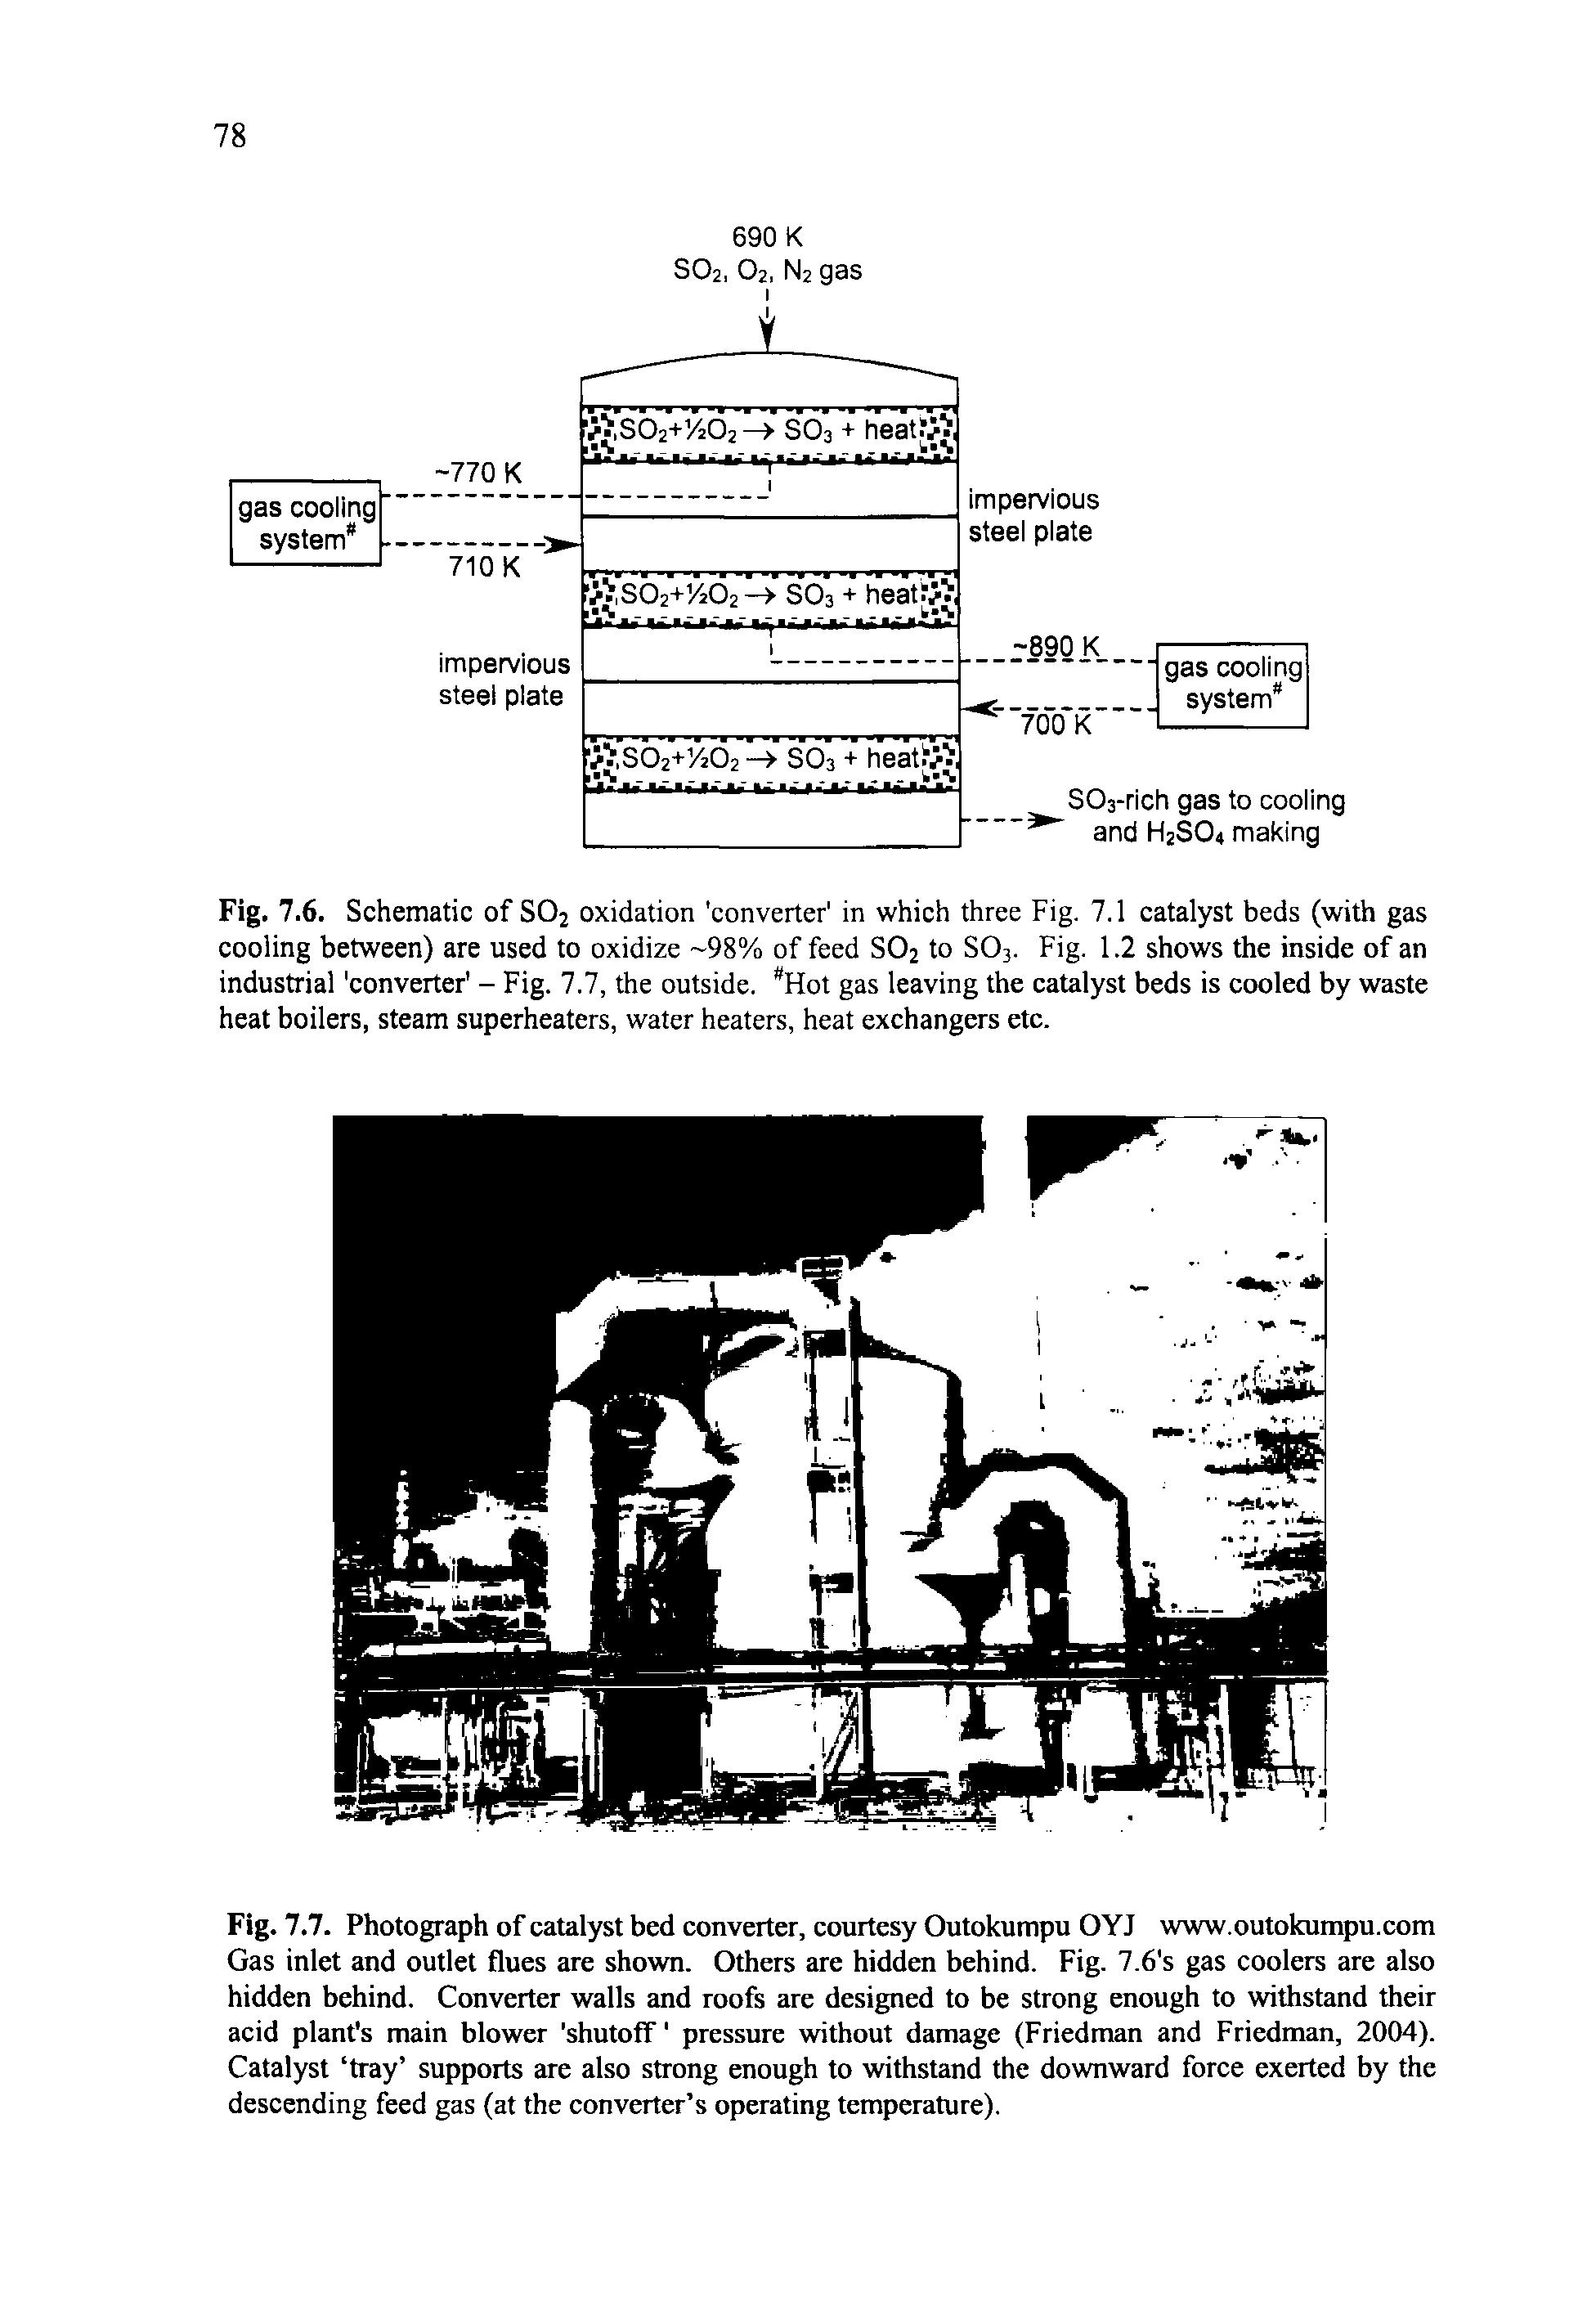 Fig. 7.7. Photograph of catalyst bed converter, courtesy Outokumpu OYJ www.outokumpu.com Gas inlet and outlet flues are shown. Others are hidden behind. Fig. 7.6 s gas coolers are also hidden behind. Converter walls and roofs are designed to be strong enough to withstand their acid plant s main blower shutoff pressure without damage (Friedman and Friedman, 2004). Catalyst tray supports are also strong enough to withstand the downward force exerted by the descending feed gas (at the converter s operating temperature).